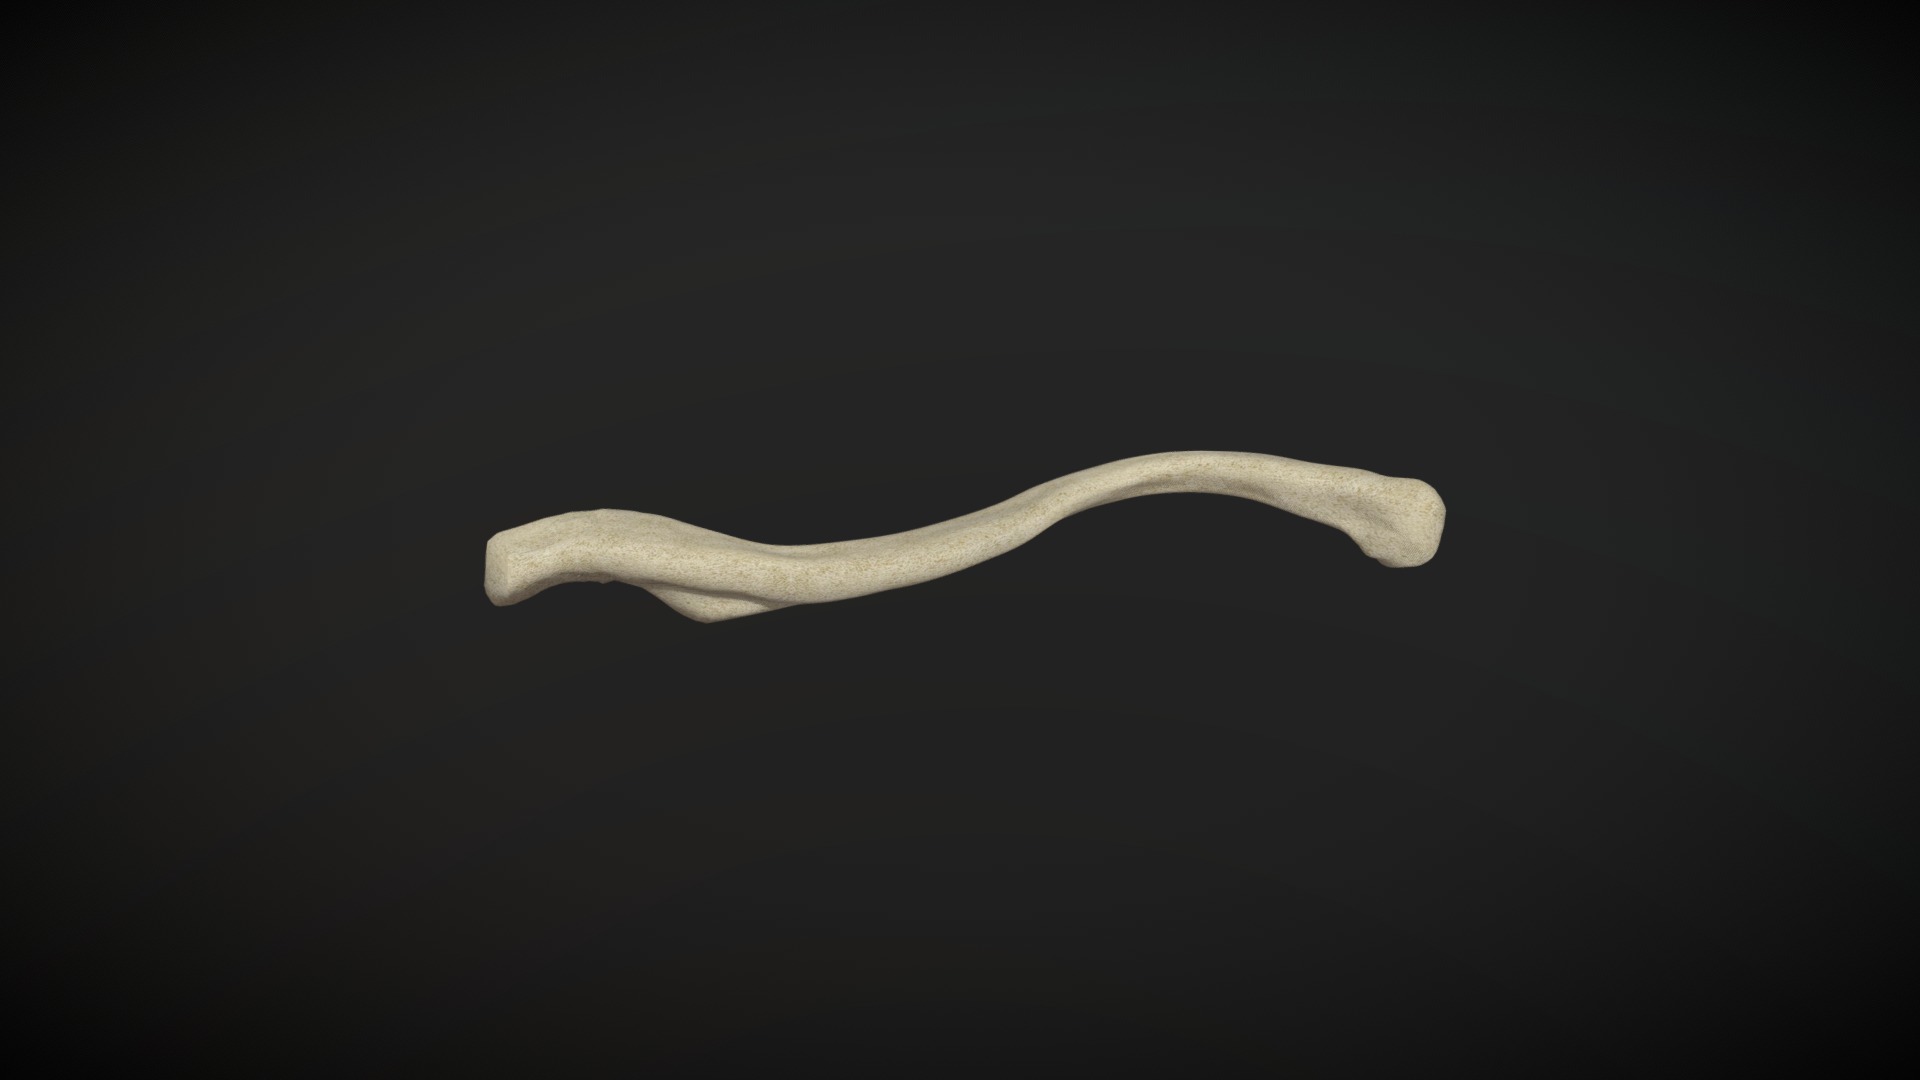 3D model Calvicle / Clavicula - This is a 3D model of the Calvicle / Clavicula. The 3D model is about a white feather on a black background.